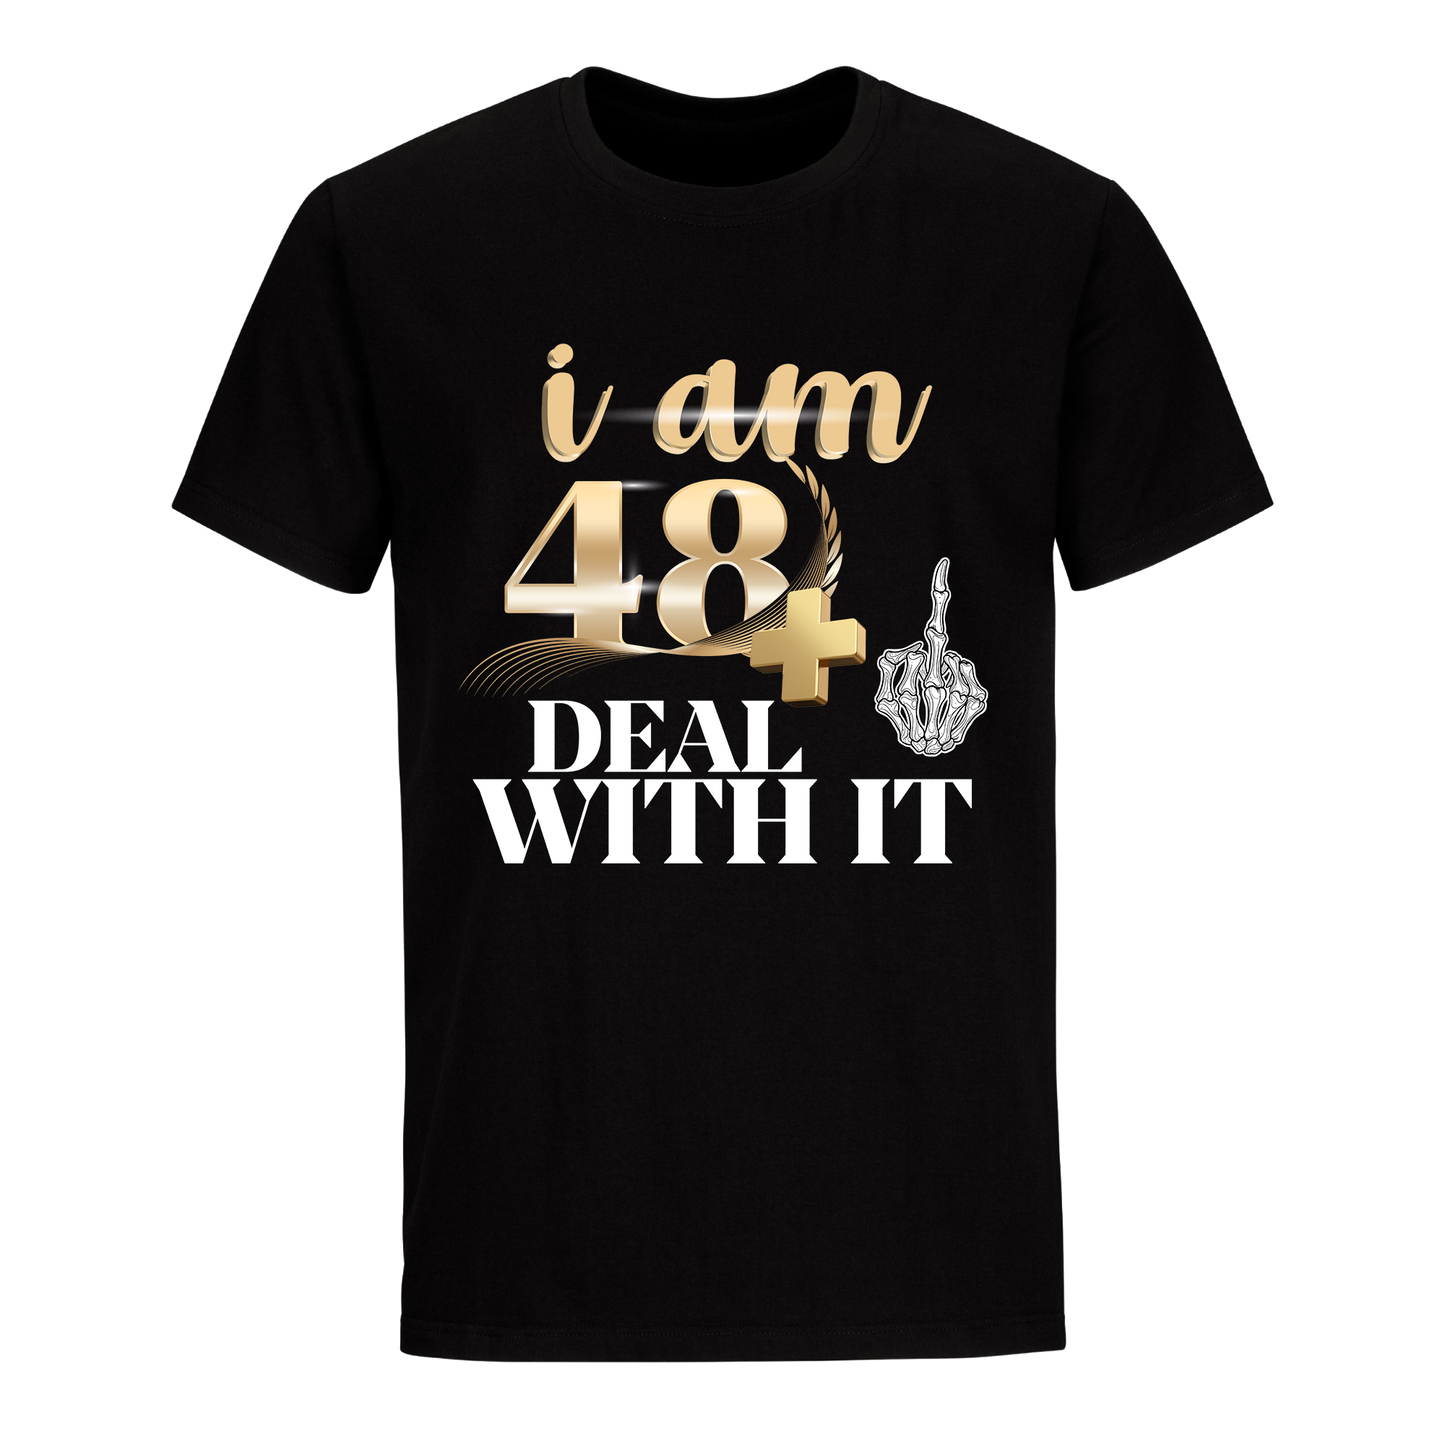 I'M 48 DEAL WITH IT UNISEX SHIRT